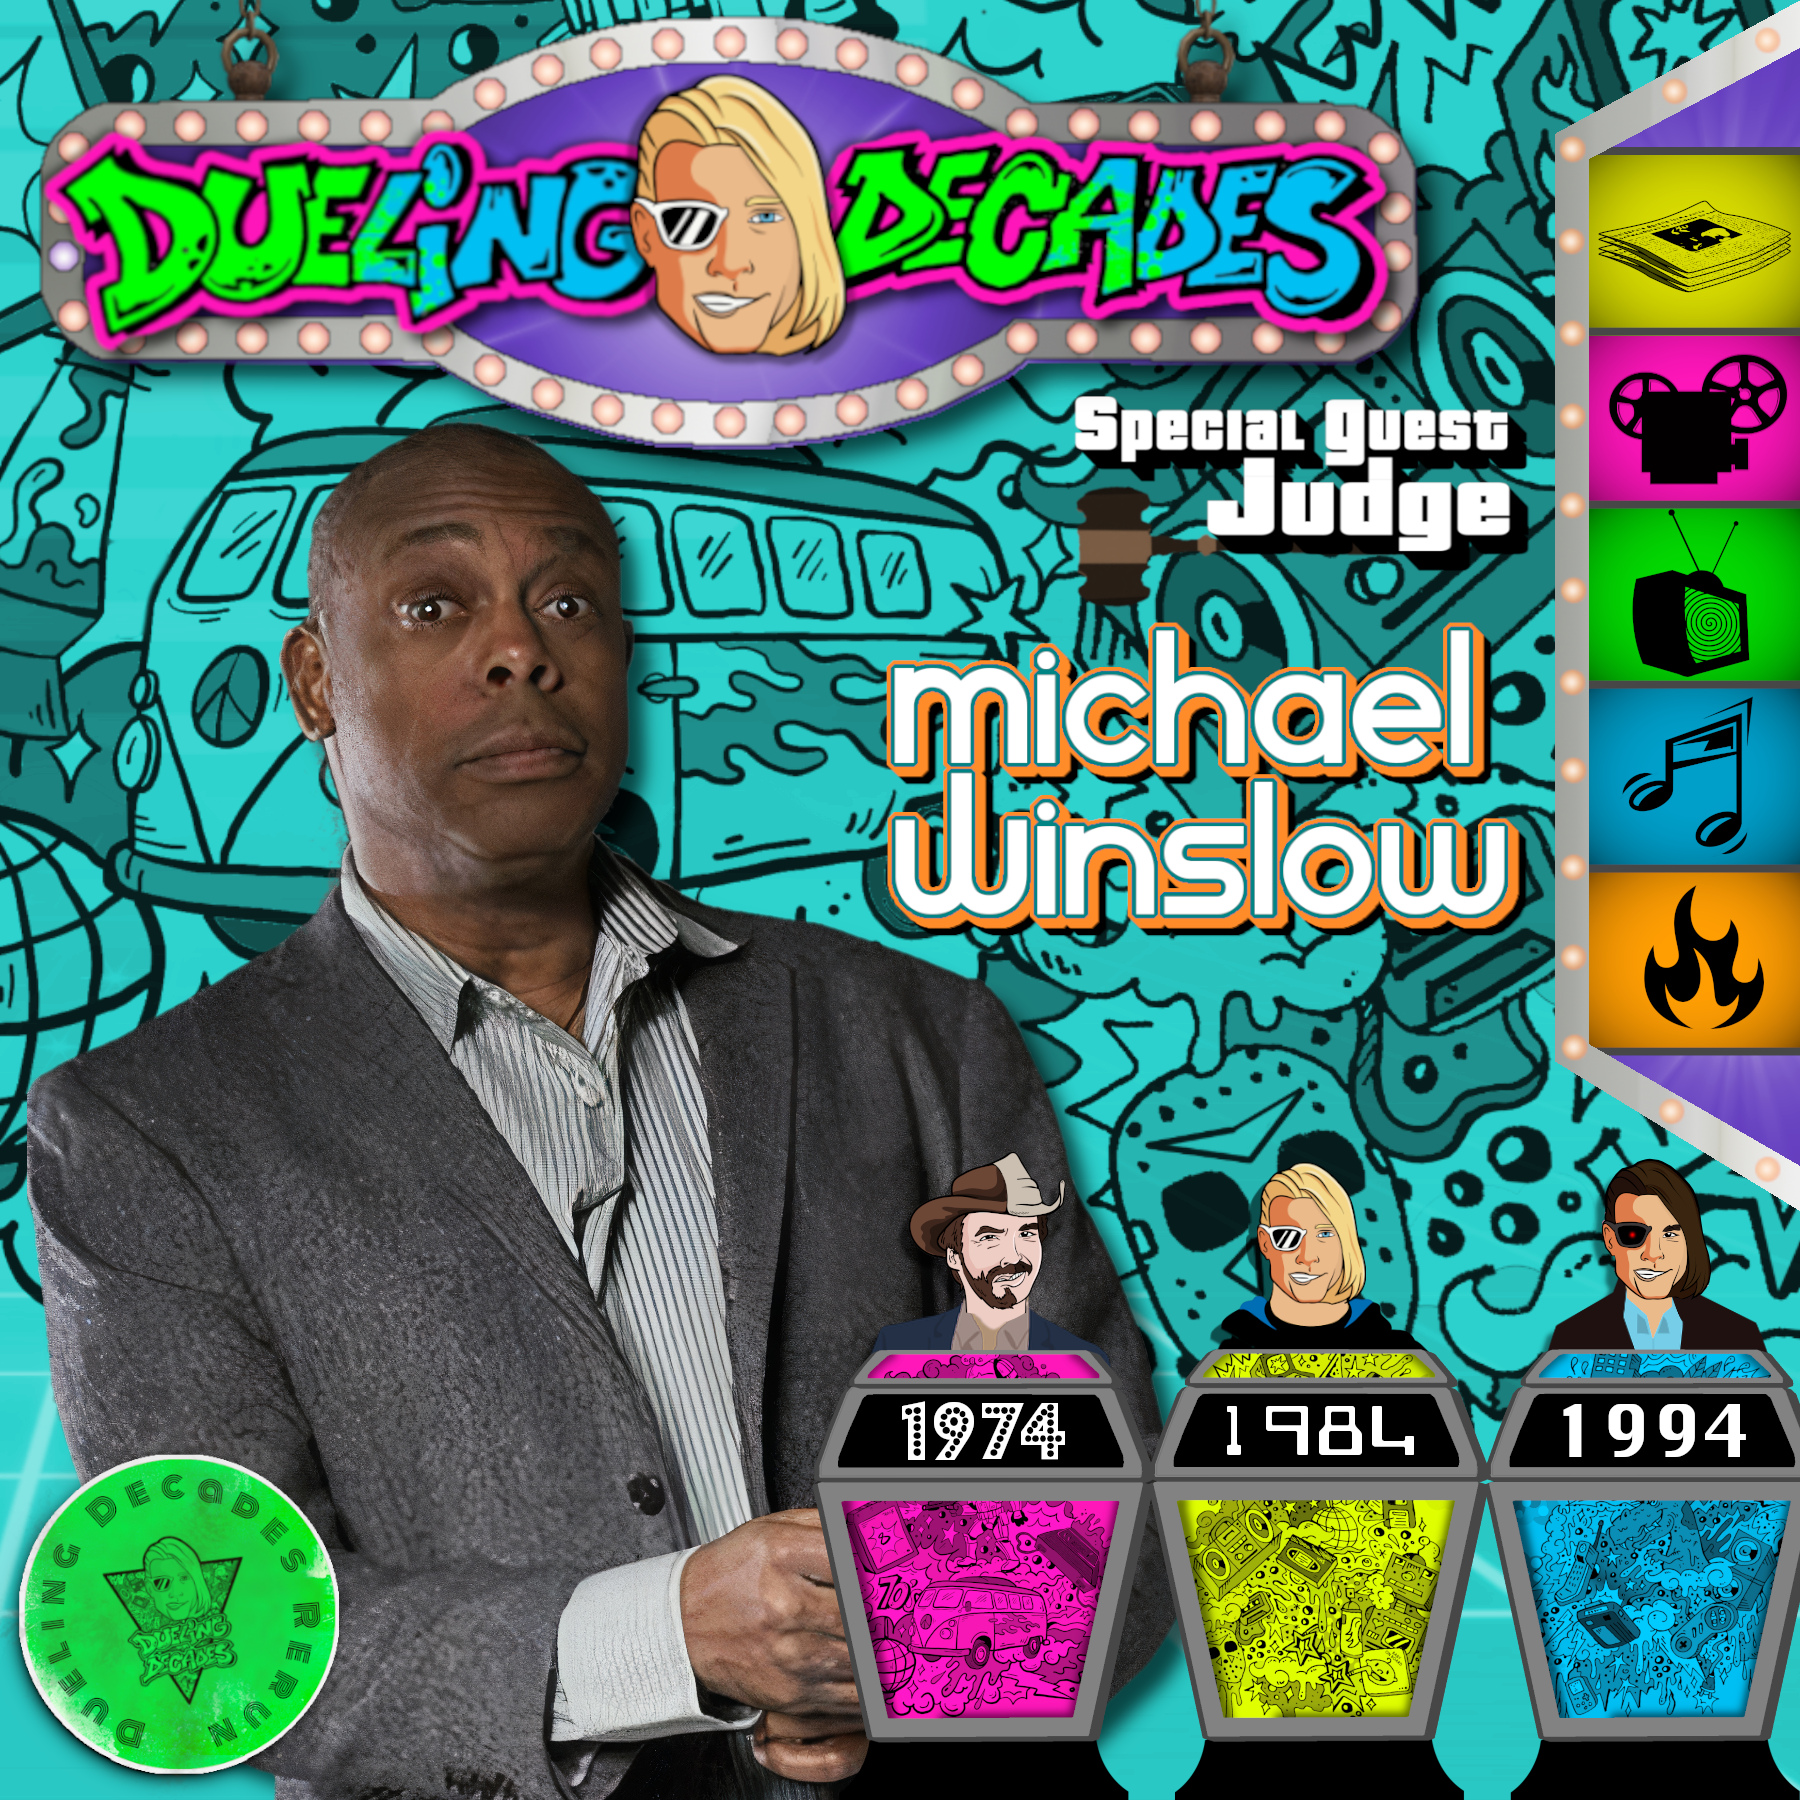 Man of 10,000 sound effects, Michael Winslow judges this battle between 1974, 1984 & 1994!